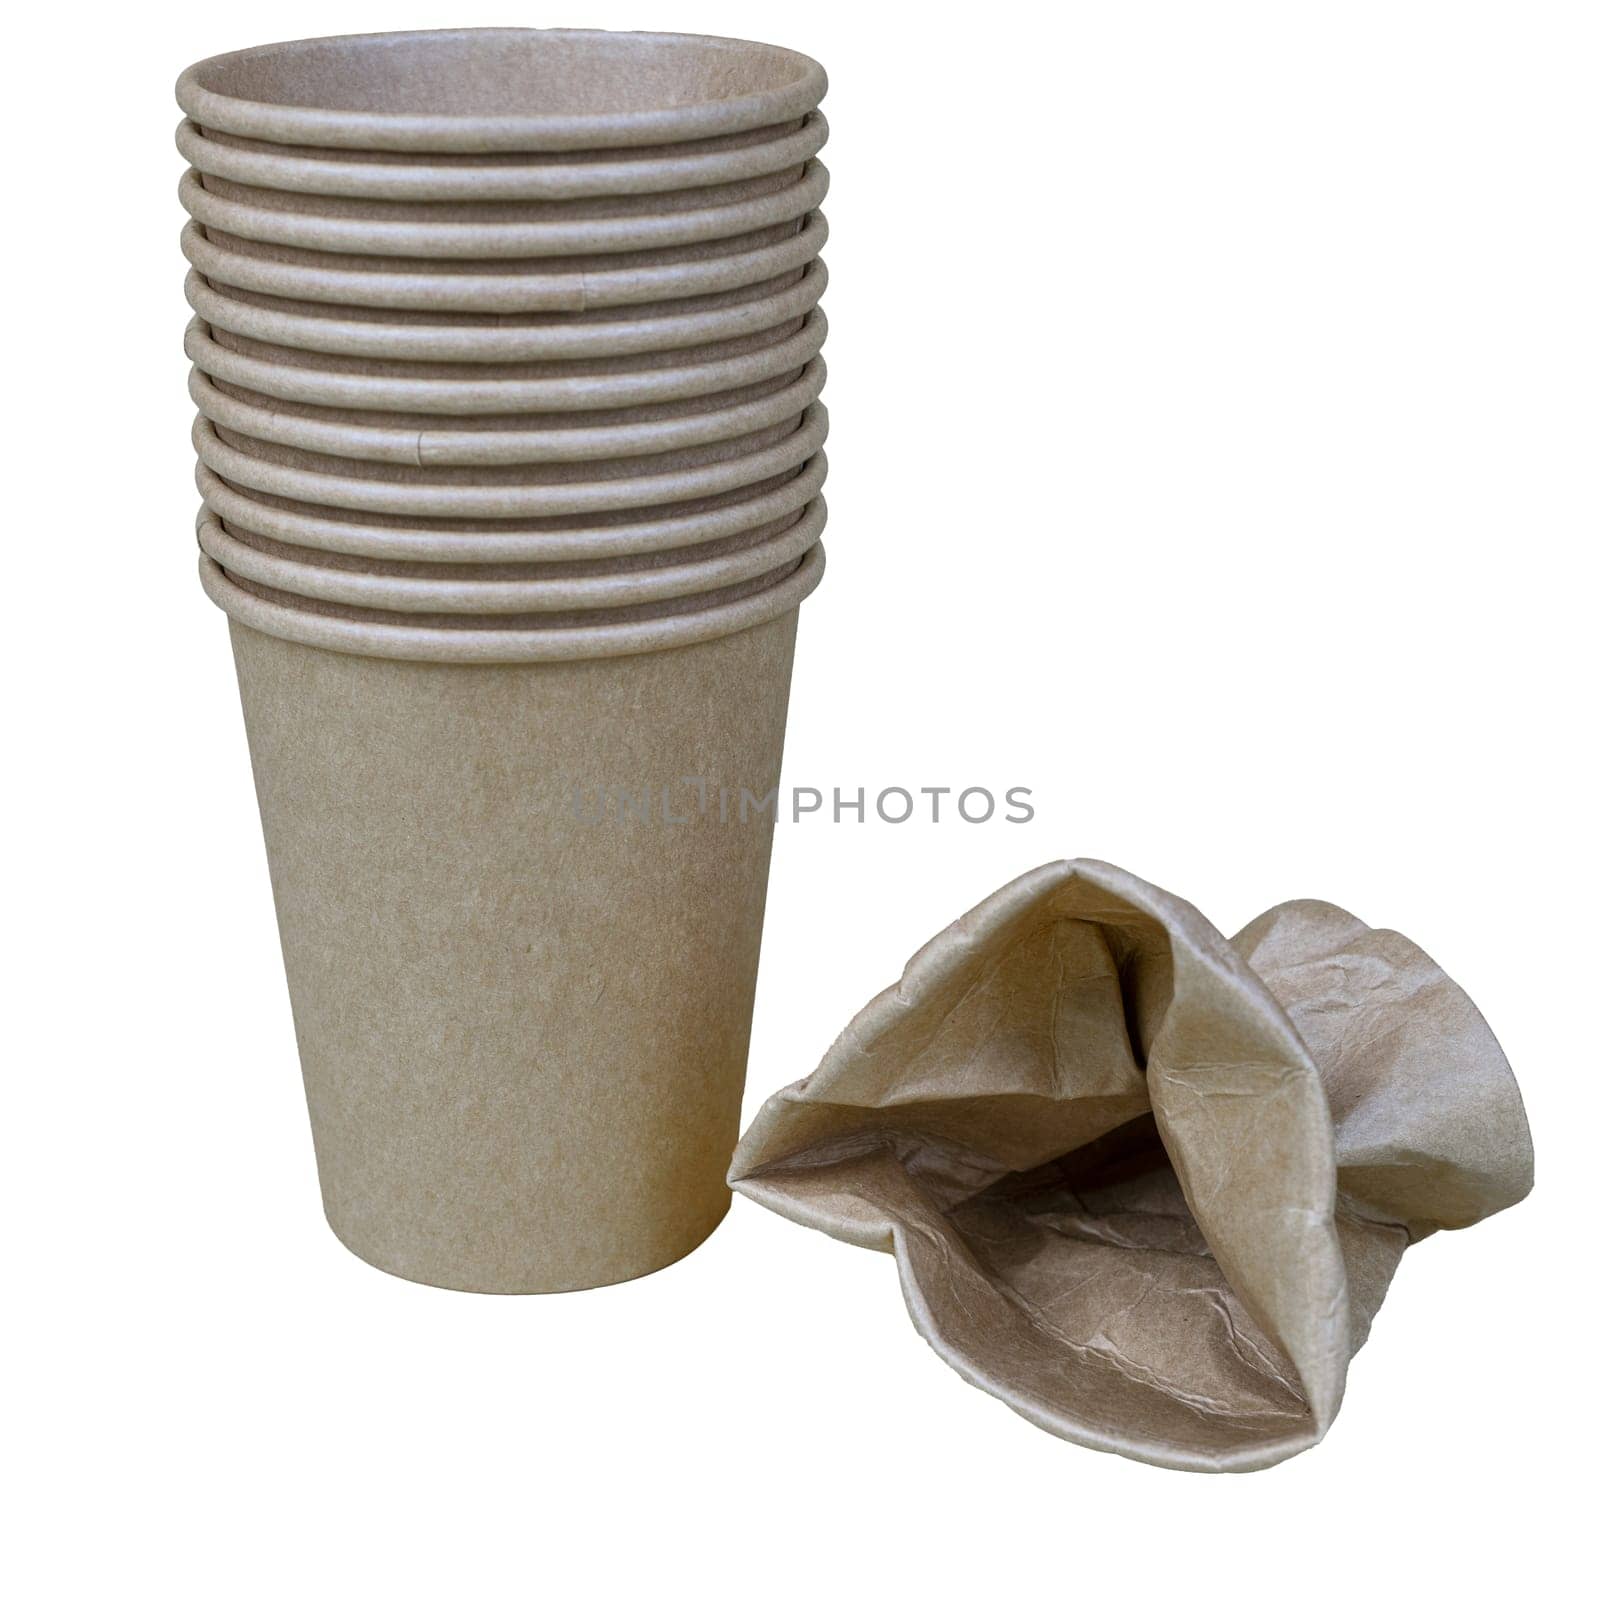 recycled paper cups by sergiodv